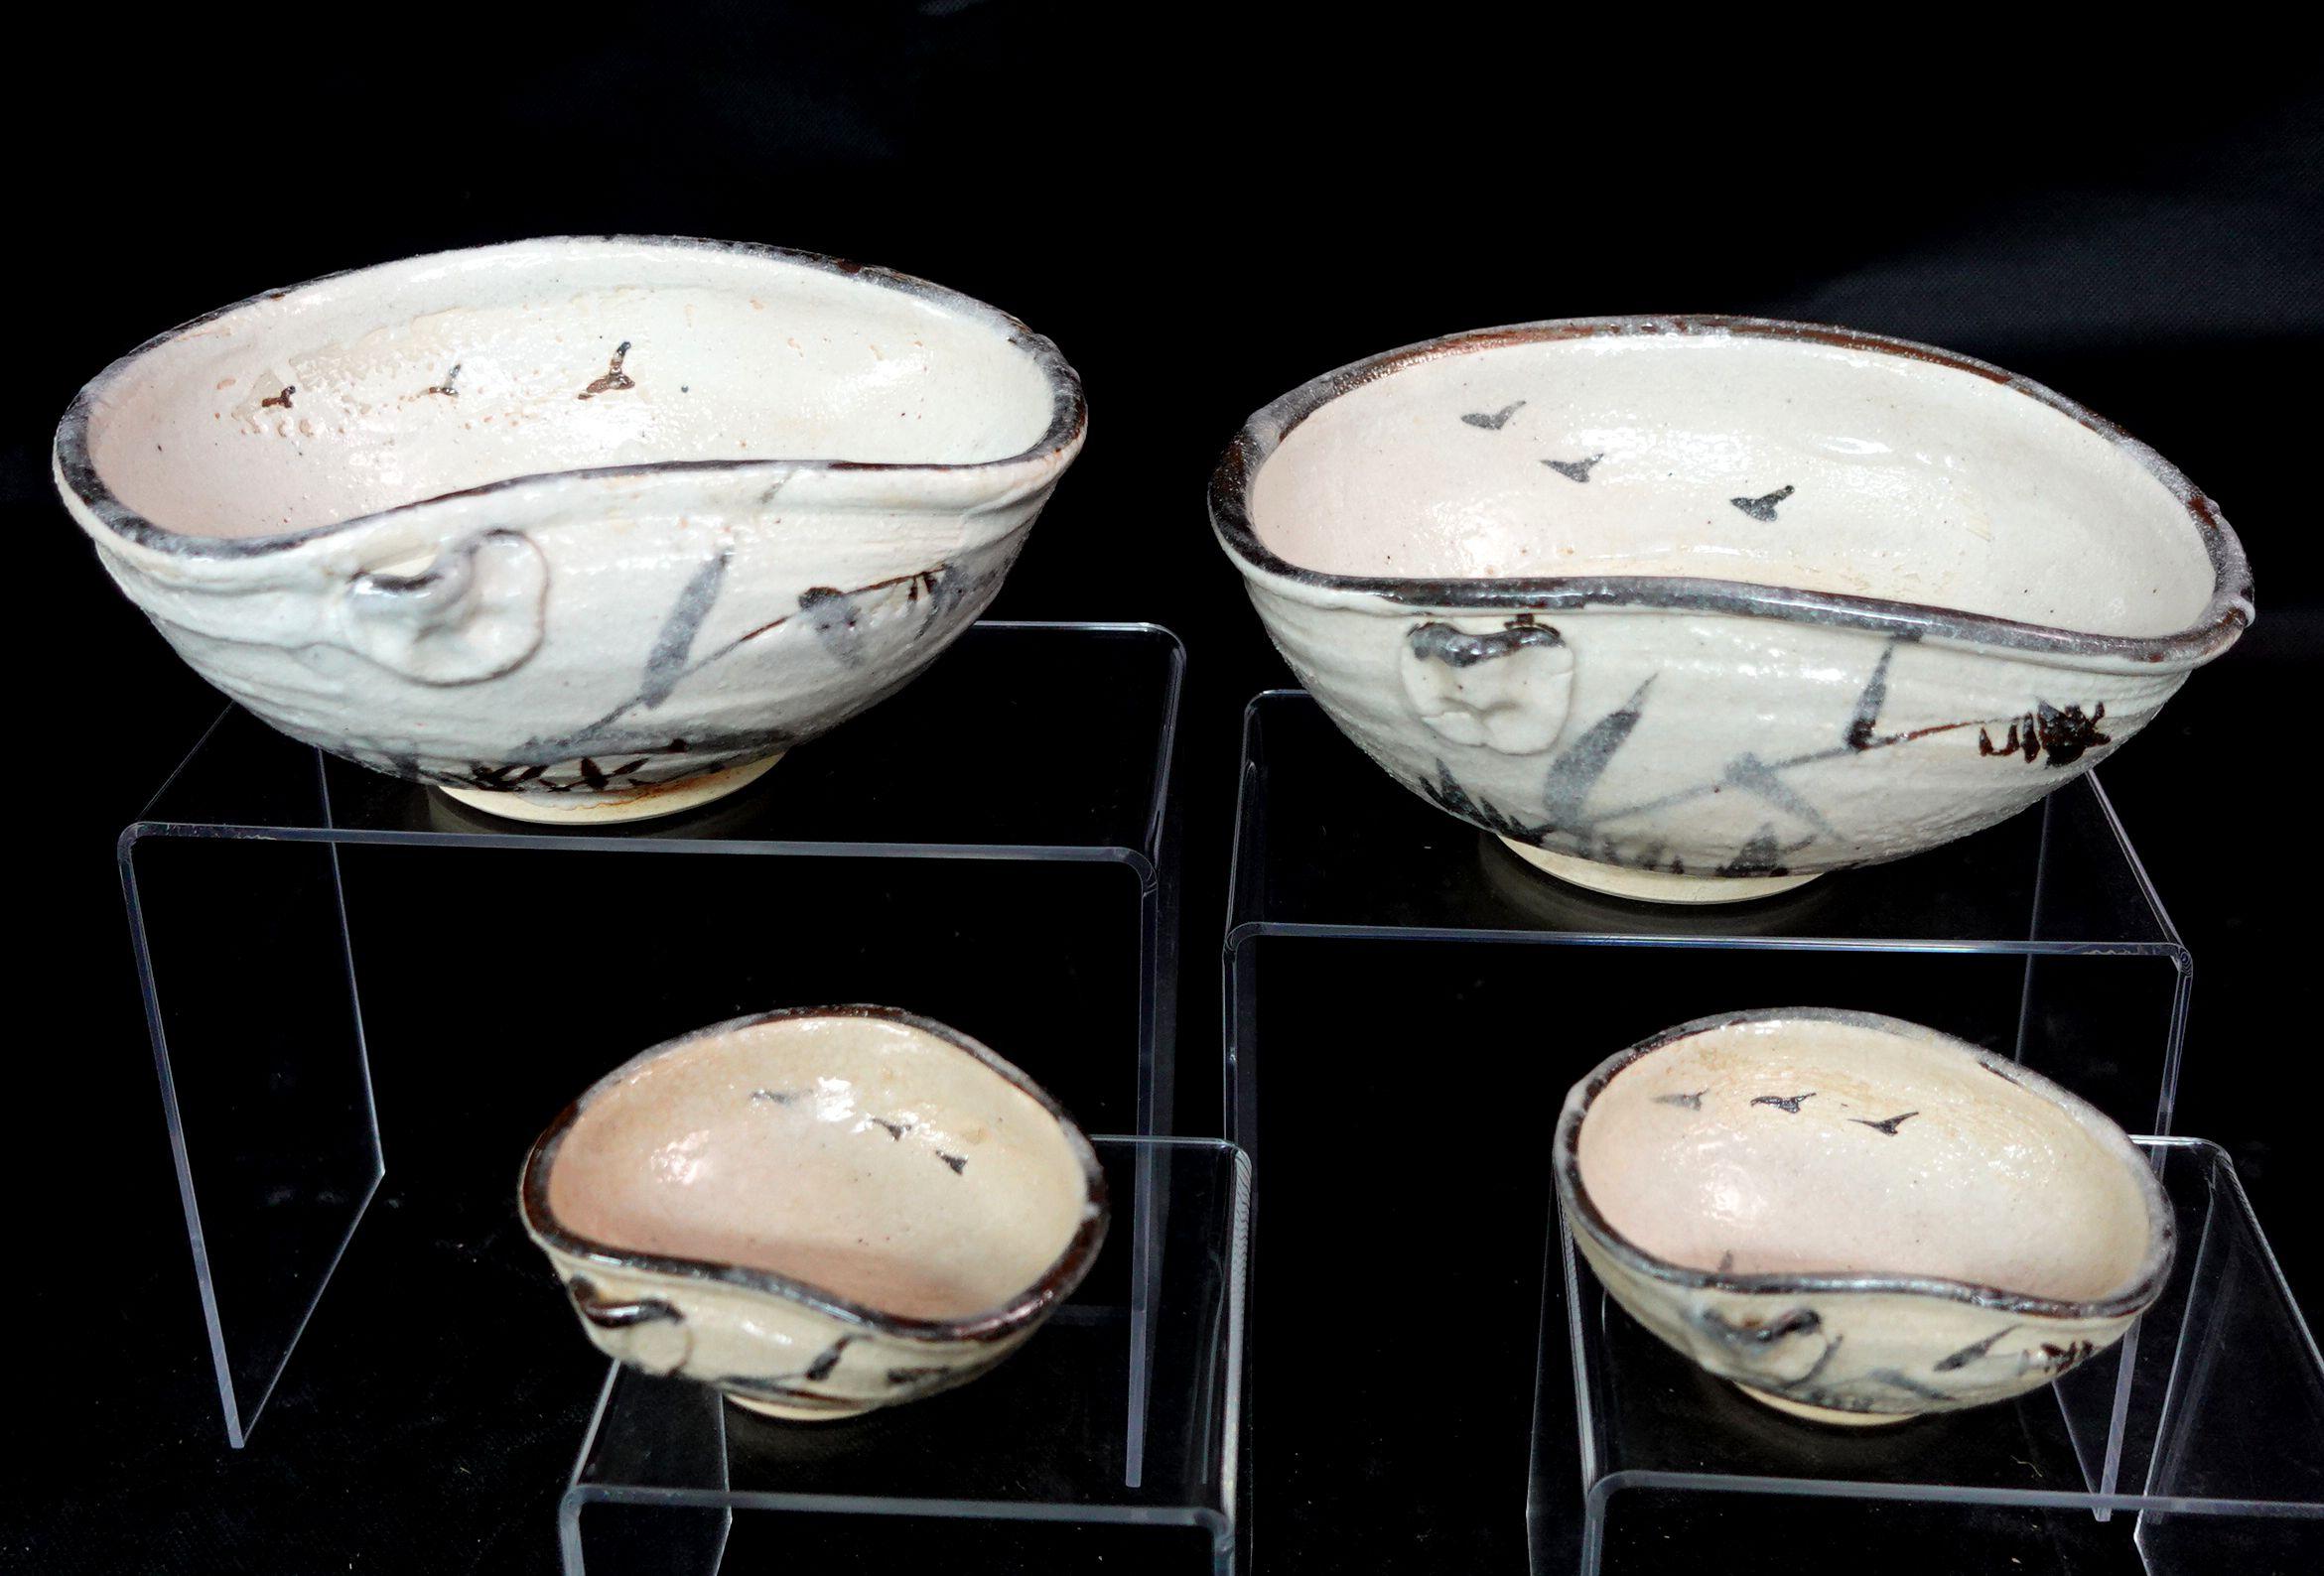 A set of Japanese ceramic bowls and sauce dish set with dark rims and soft organic form. H: 3 in (7.6cm) W: 6 in (15.24 cm) L: 7 in (17.78 cm)H: 3.5 in (8.89 cm) W: 3 in (7.6 cm) L: 2 in (5.1 cm)